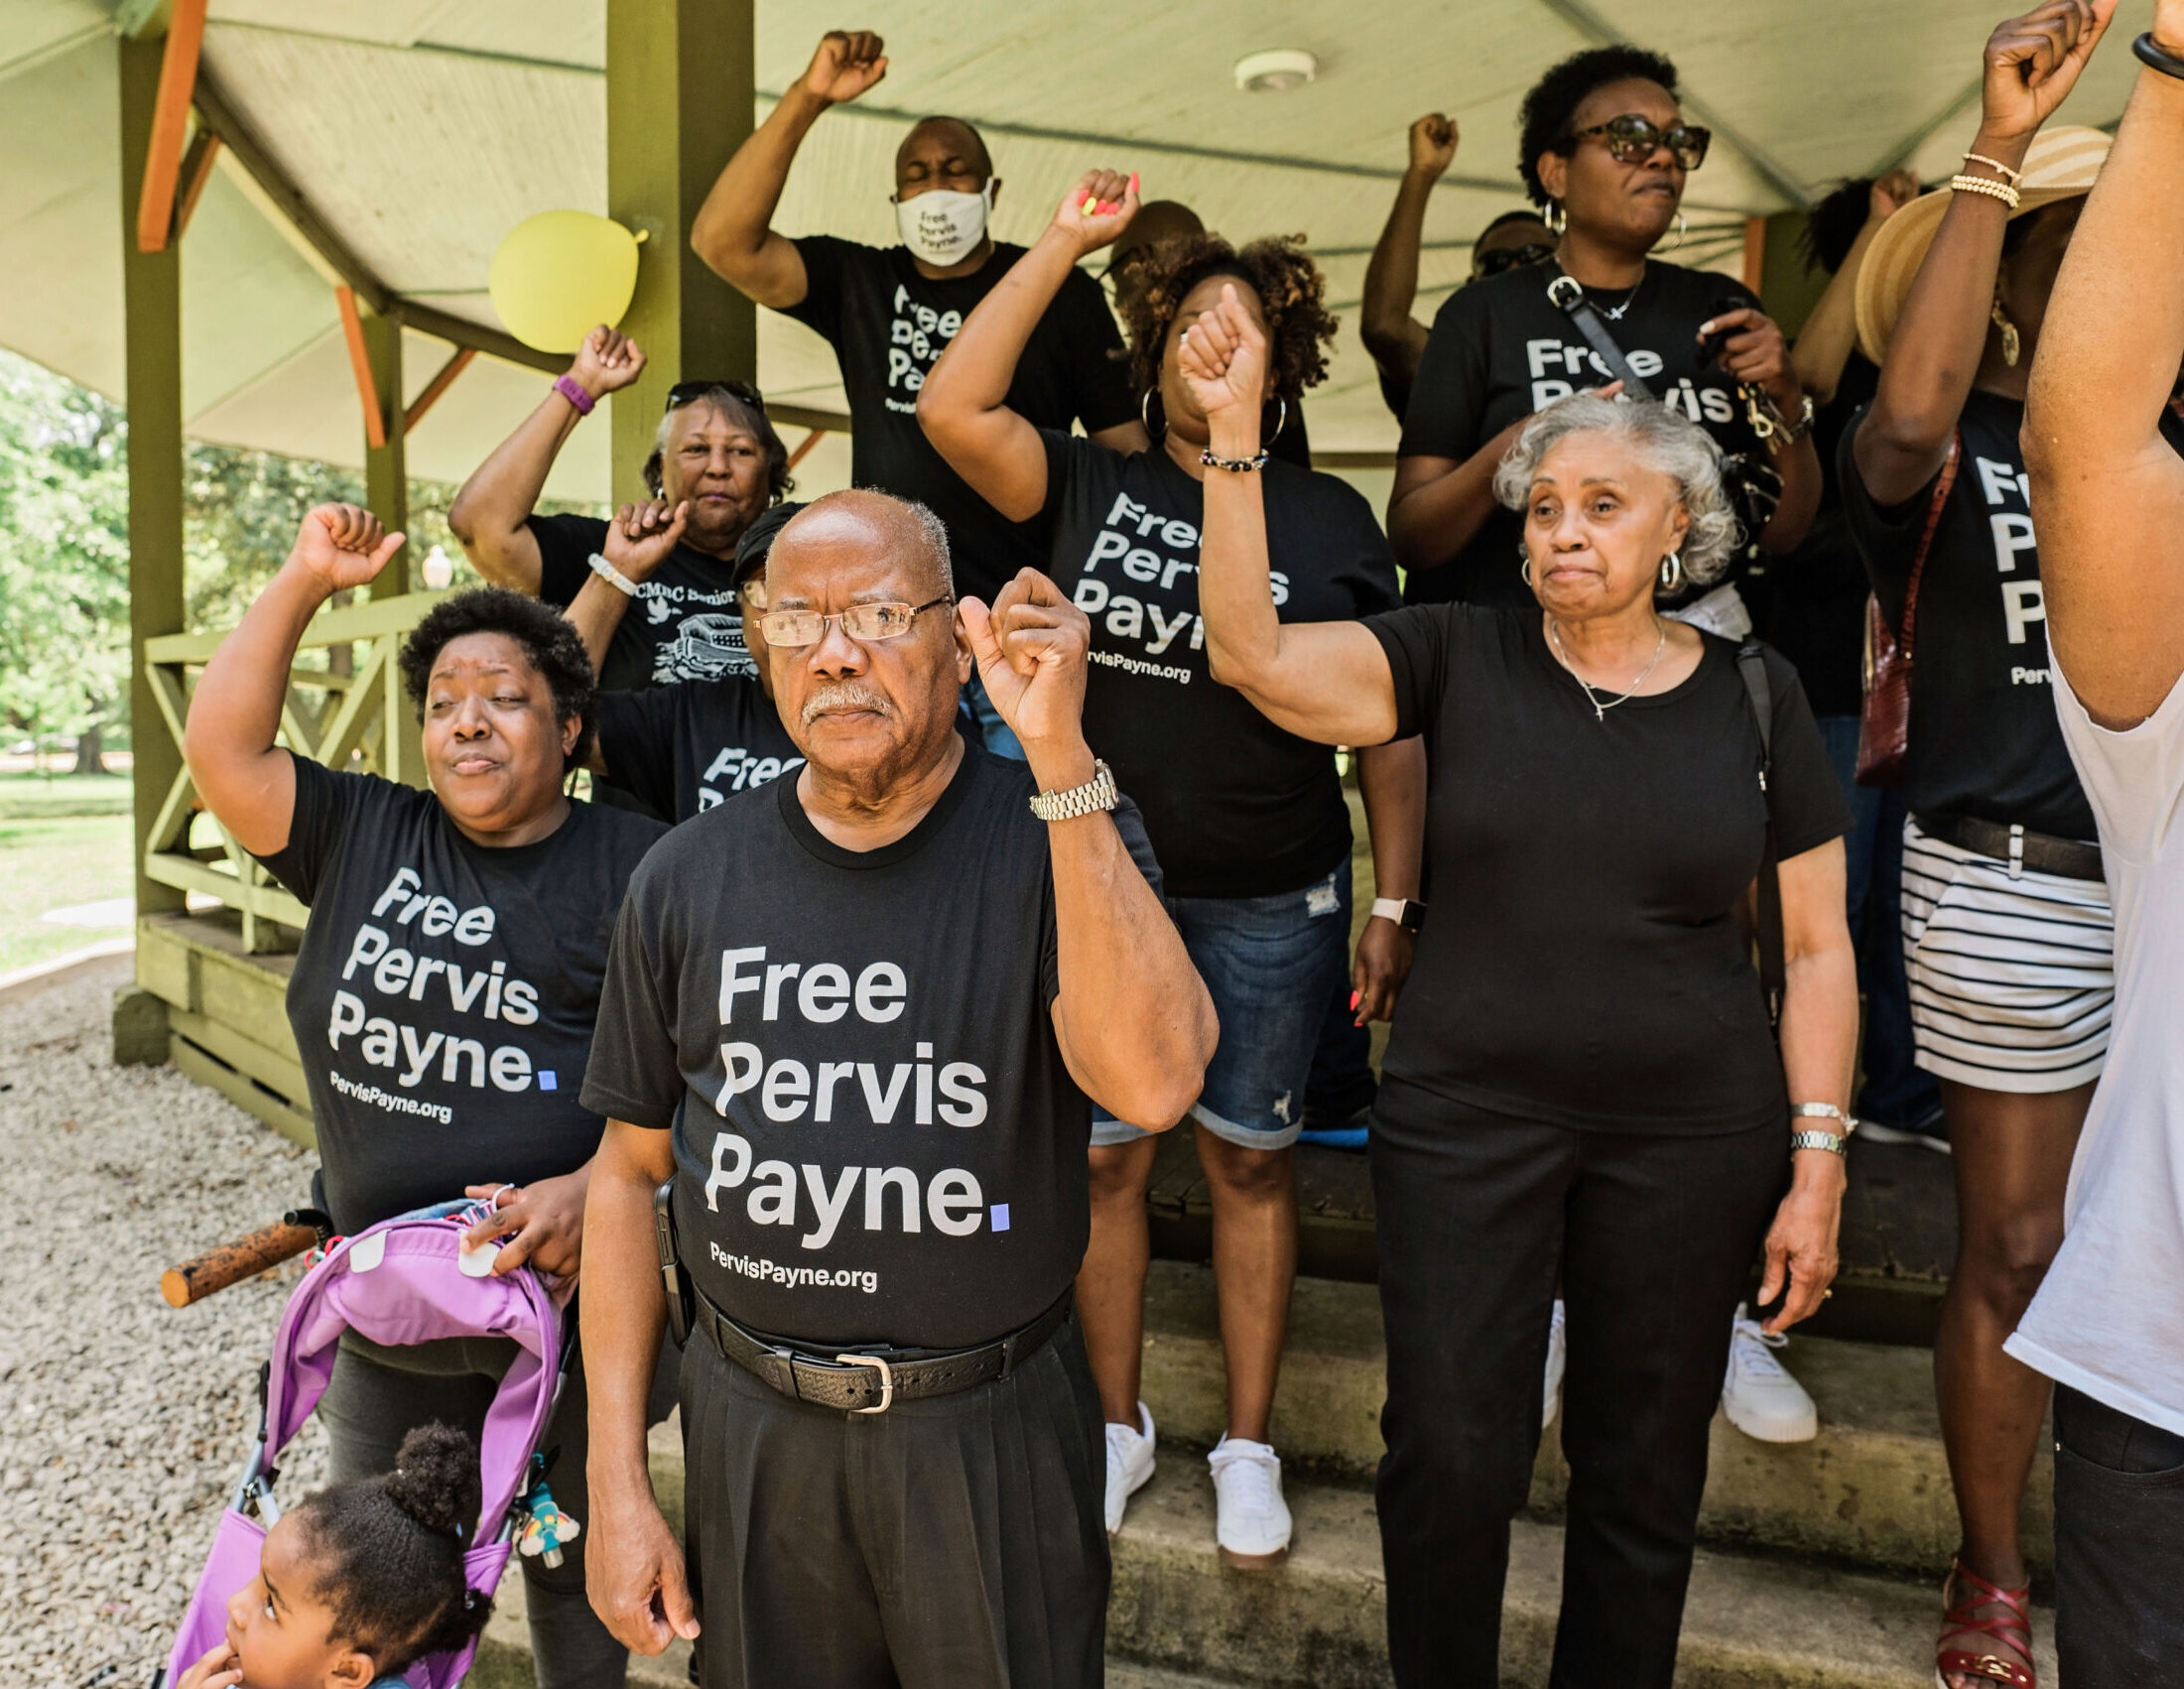 Supporters at a Free Pervis Payne rally in Tennessee in June 2021. (Image: Courtesy of Phillip Van Zandt)